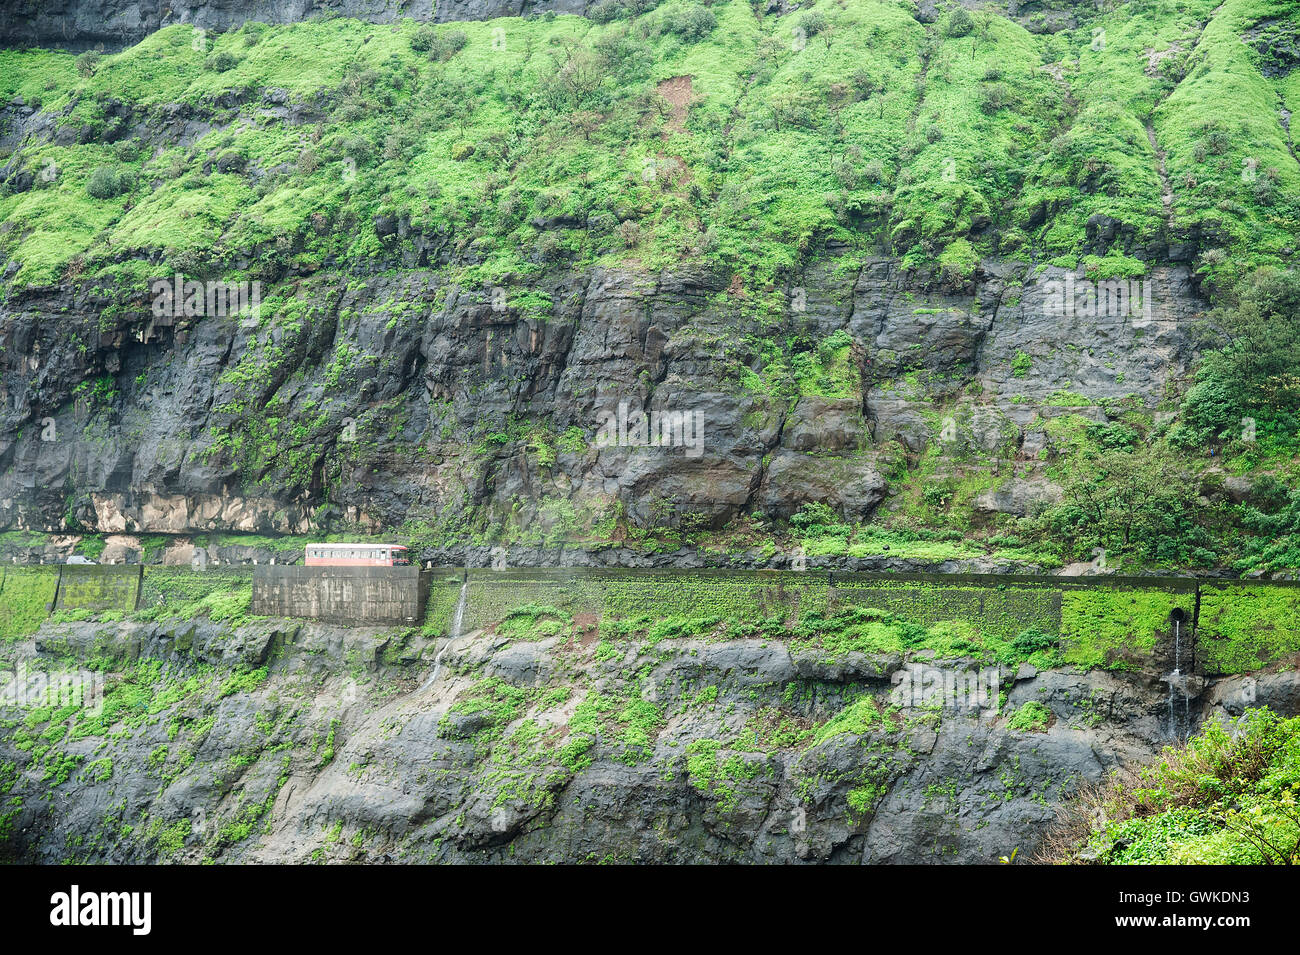 The image of State road transport bus in Malshej Ghats, western Ghats, Monsoon, Maharashtra, India Stock Photo